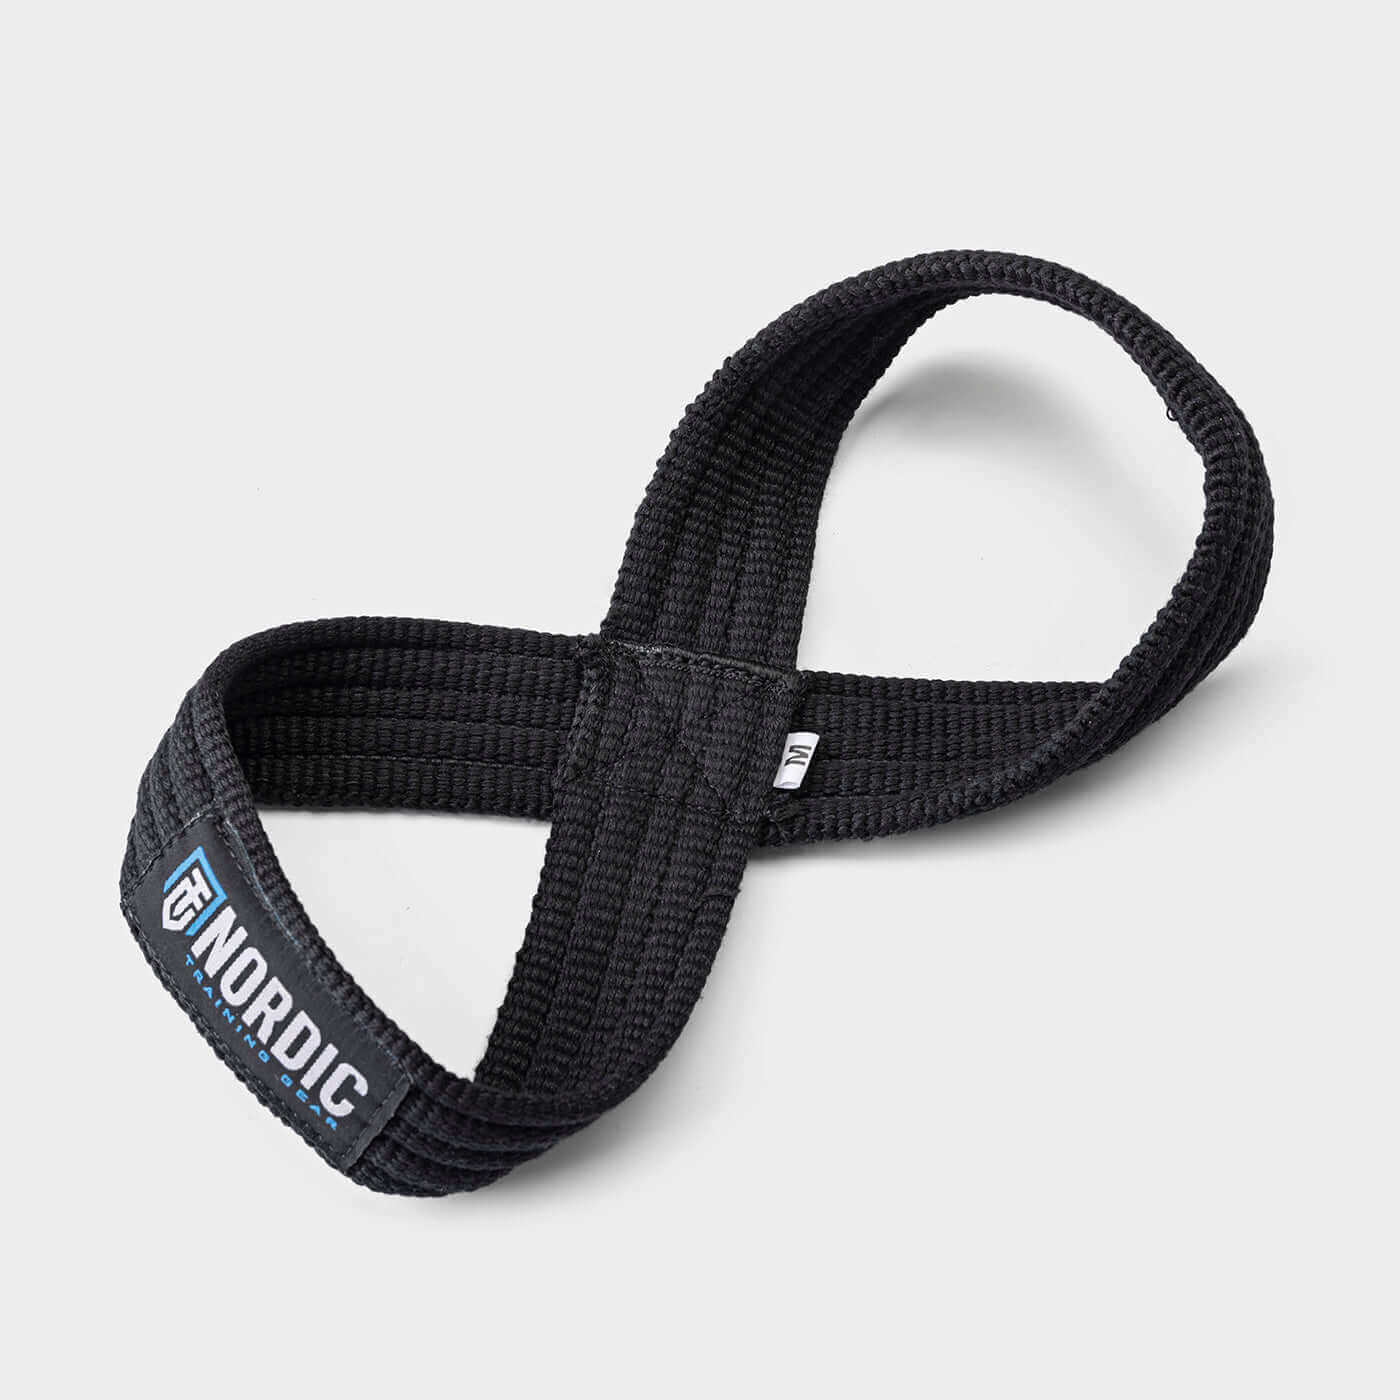 Figure 8 Lifting Straps - Warm Body Cold Mind